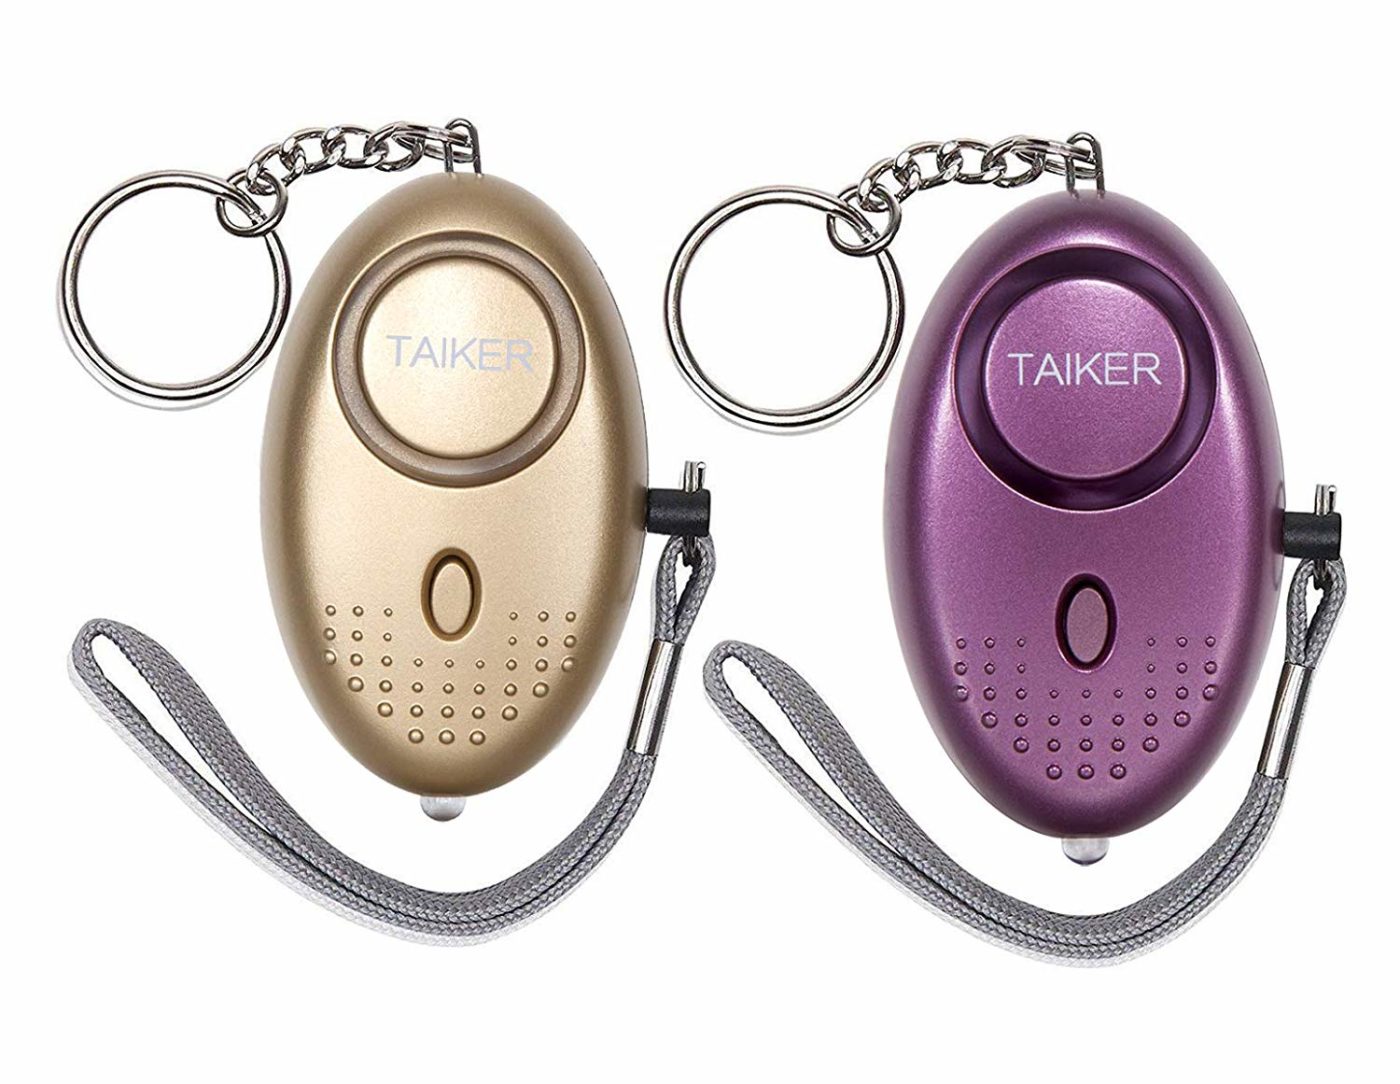 10 Best Self-Defense Keychain Reviews: A Useful Travel Safety Gadget